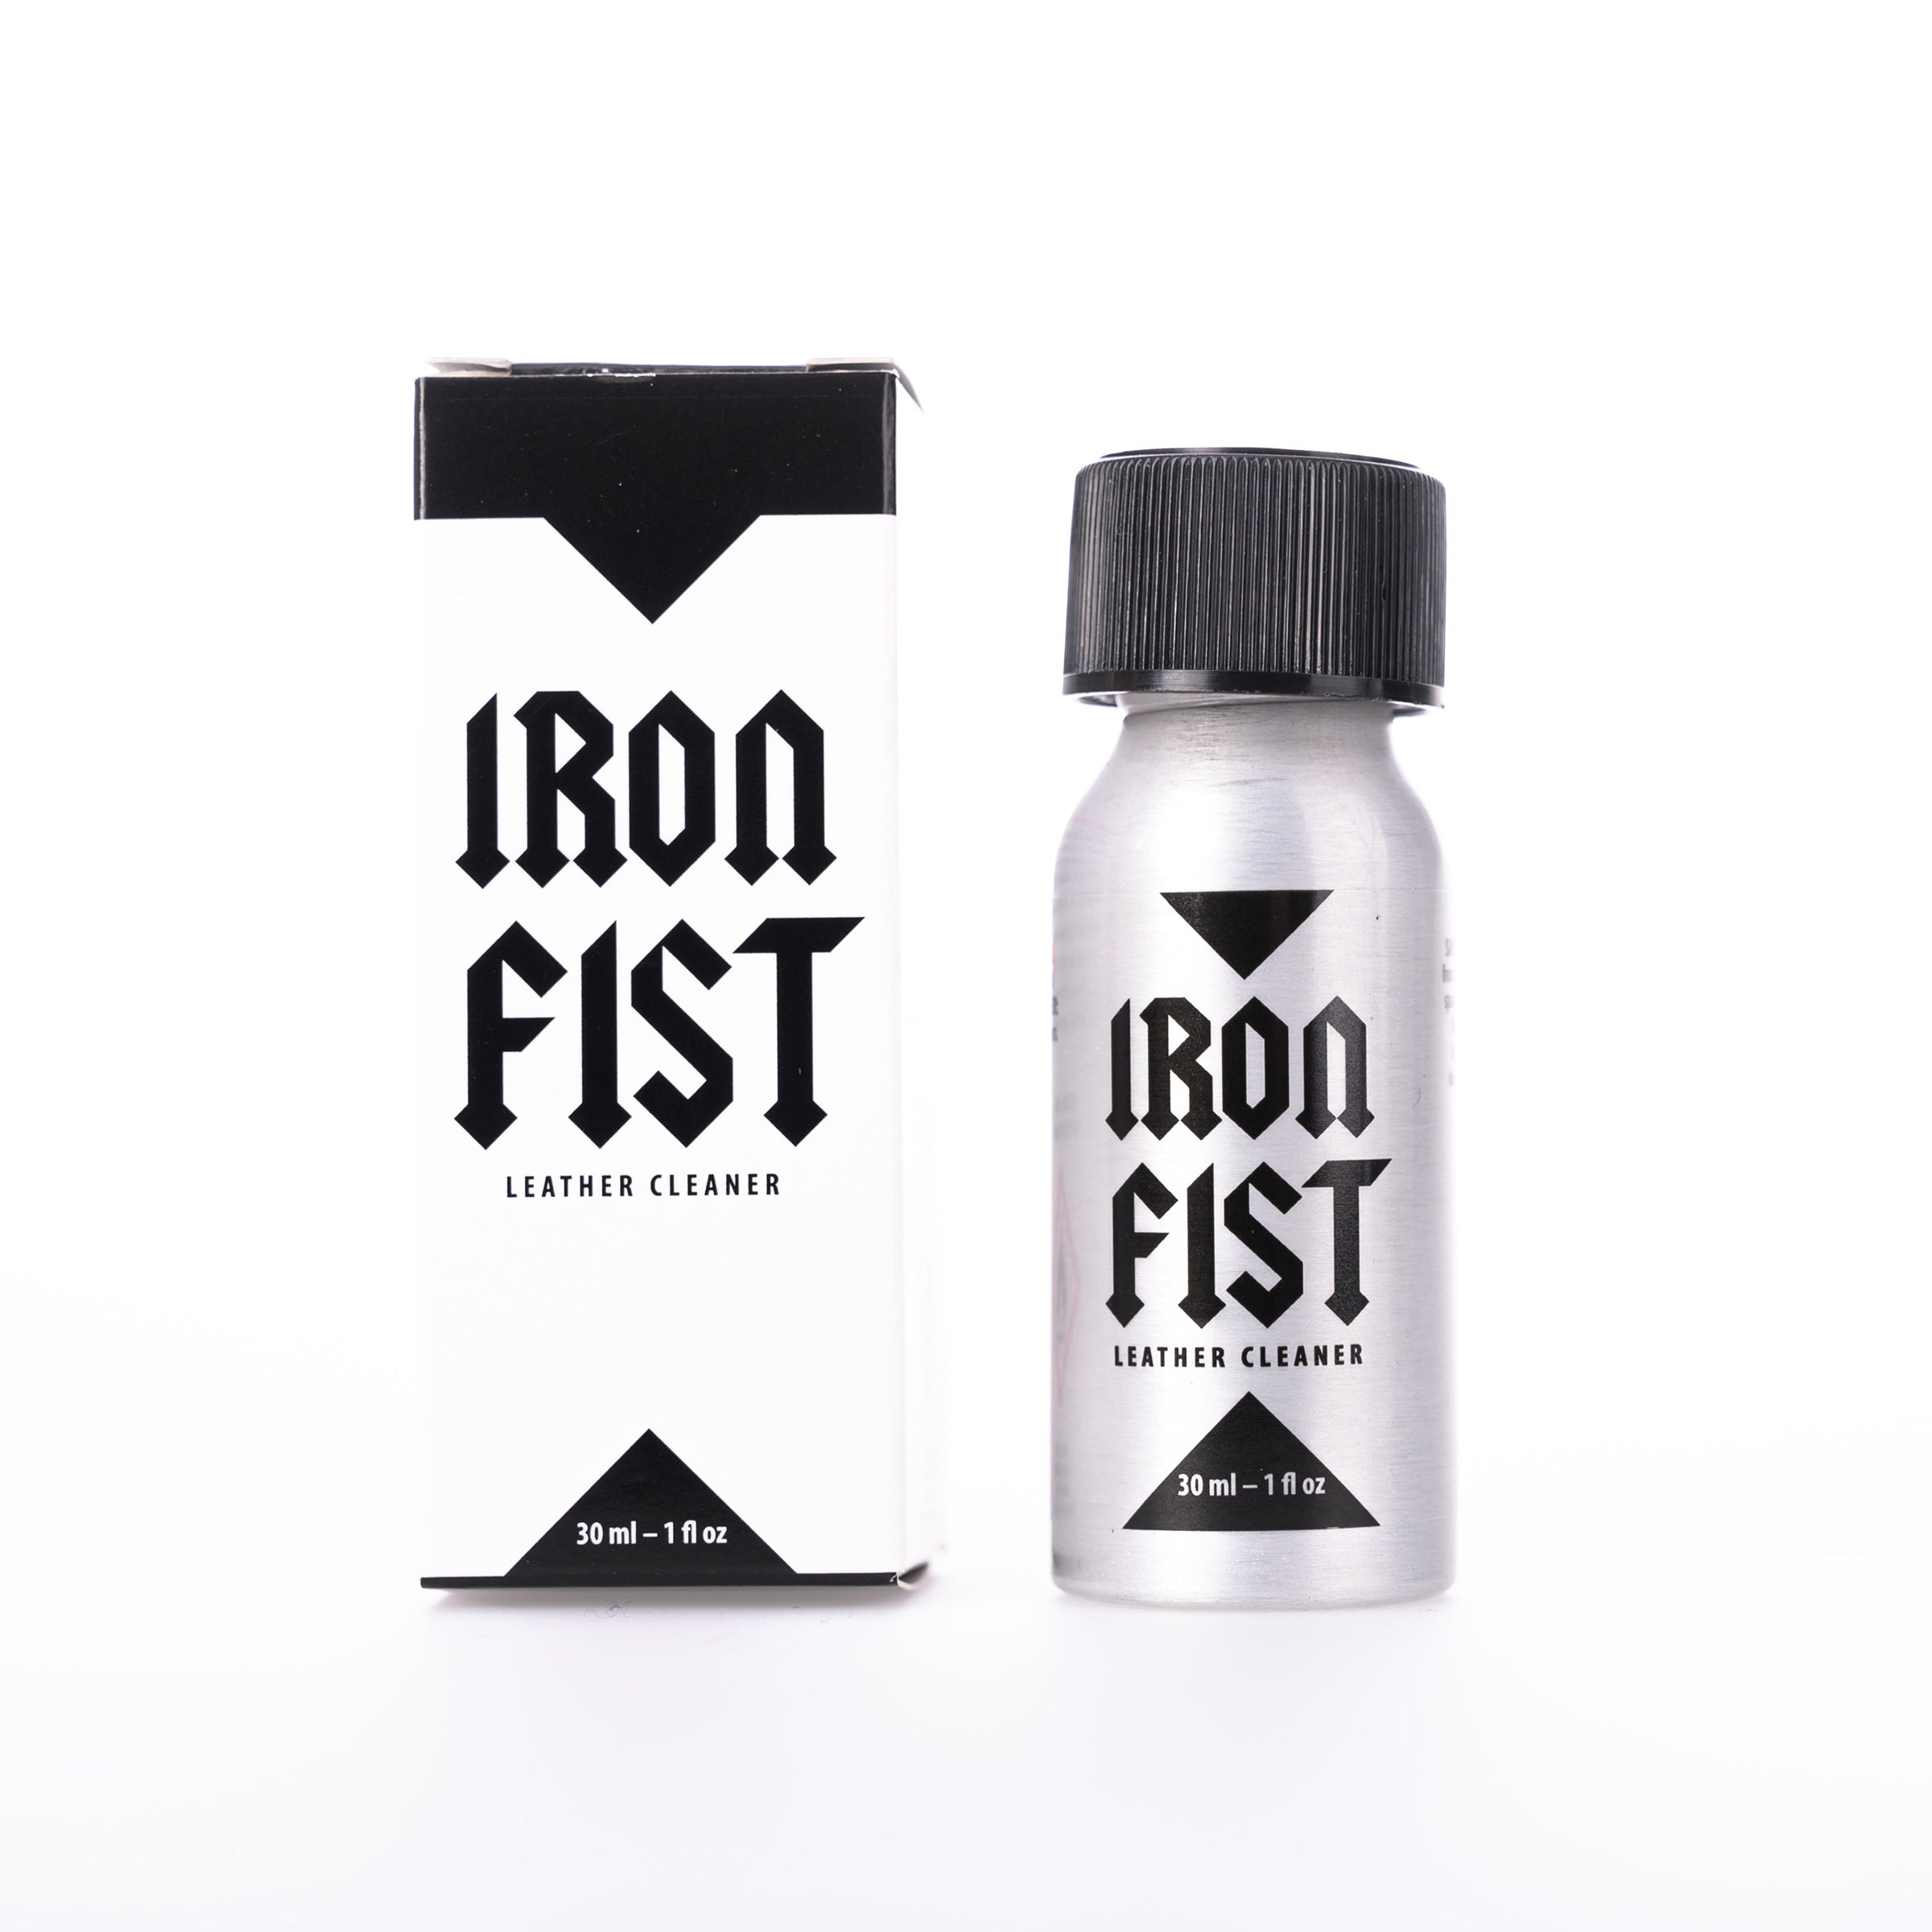 Iron Fist 24ml, POPPERS UK, POPPERS USA, FREE DELIVERY, NEXT DAY DELIVERY